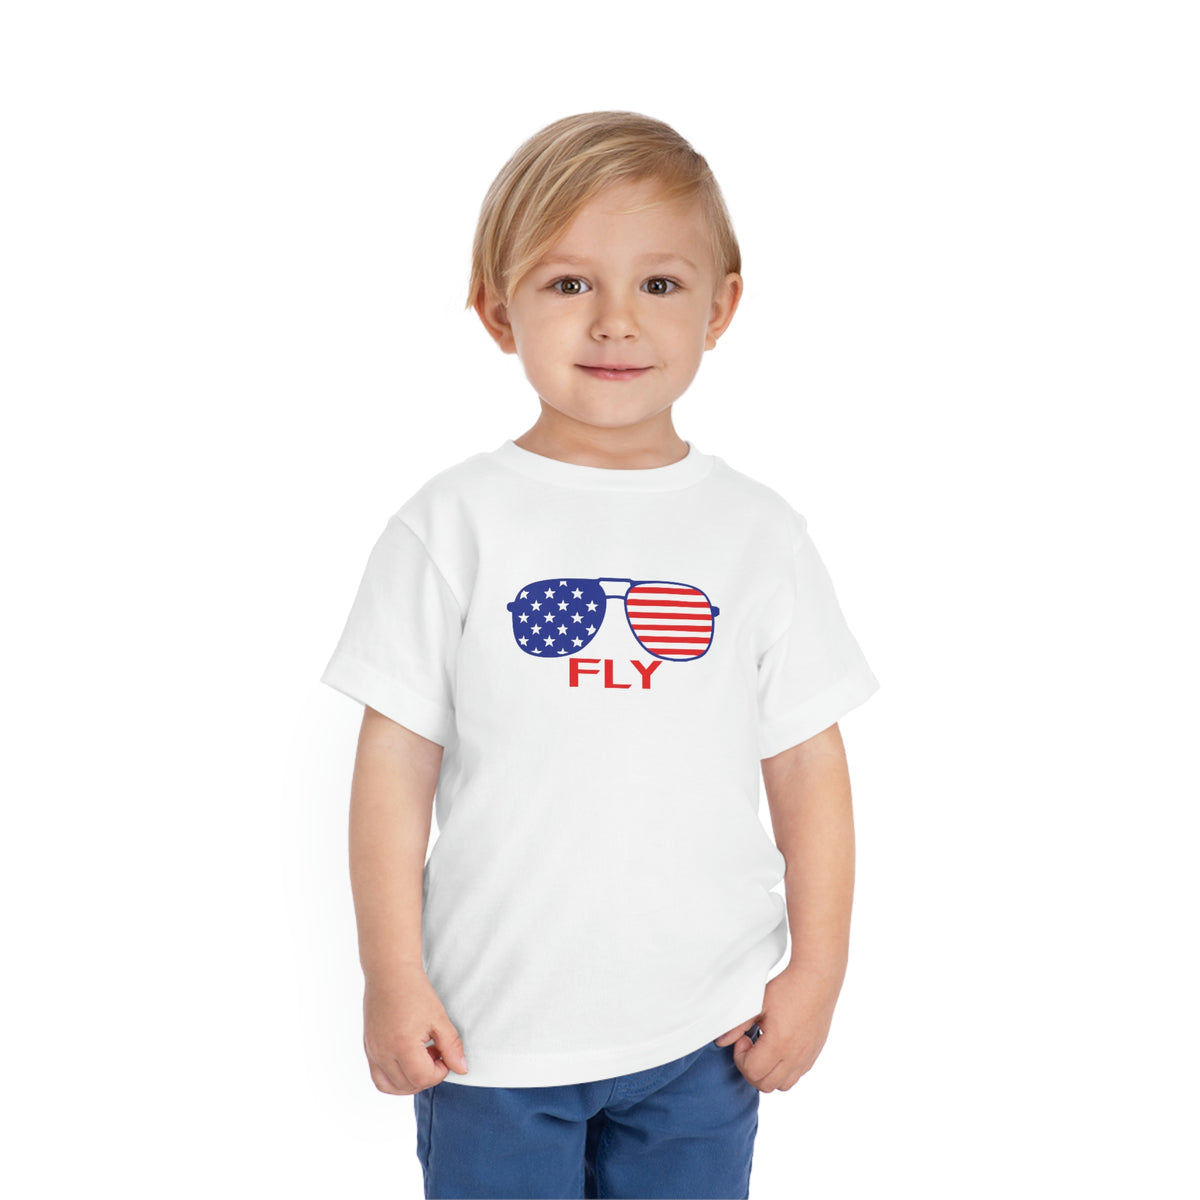 Toddler Fly Tee